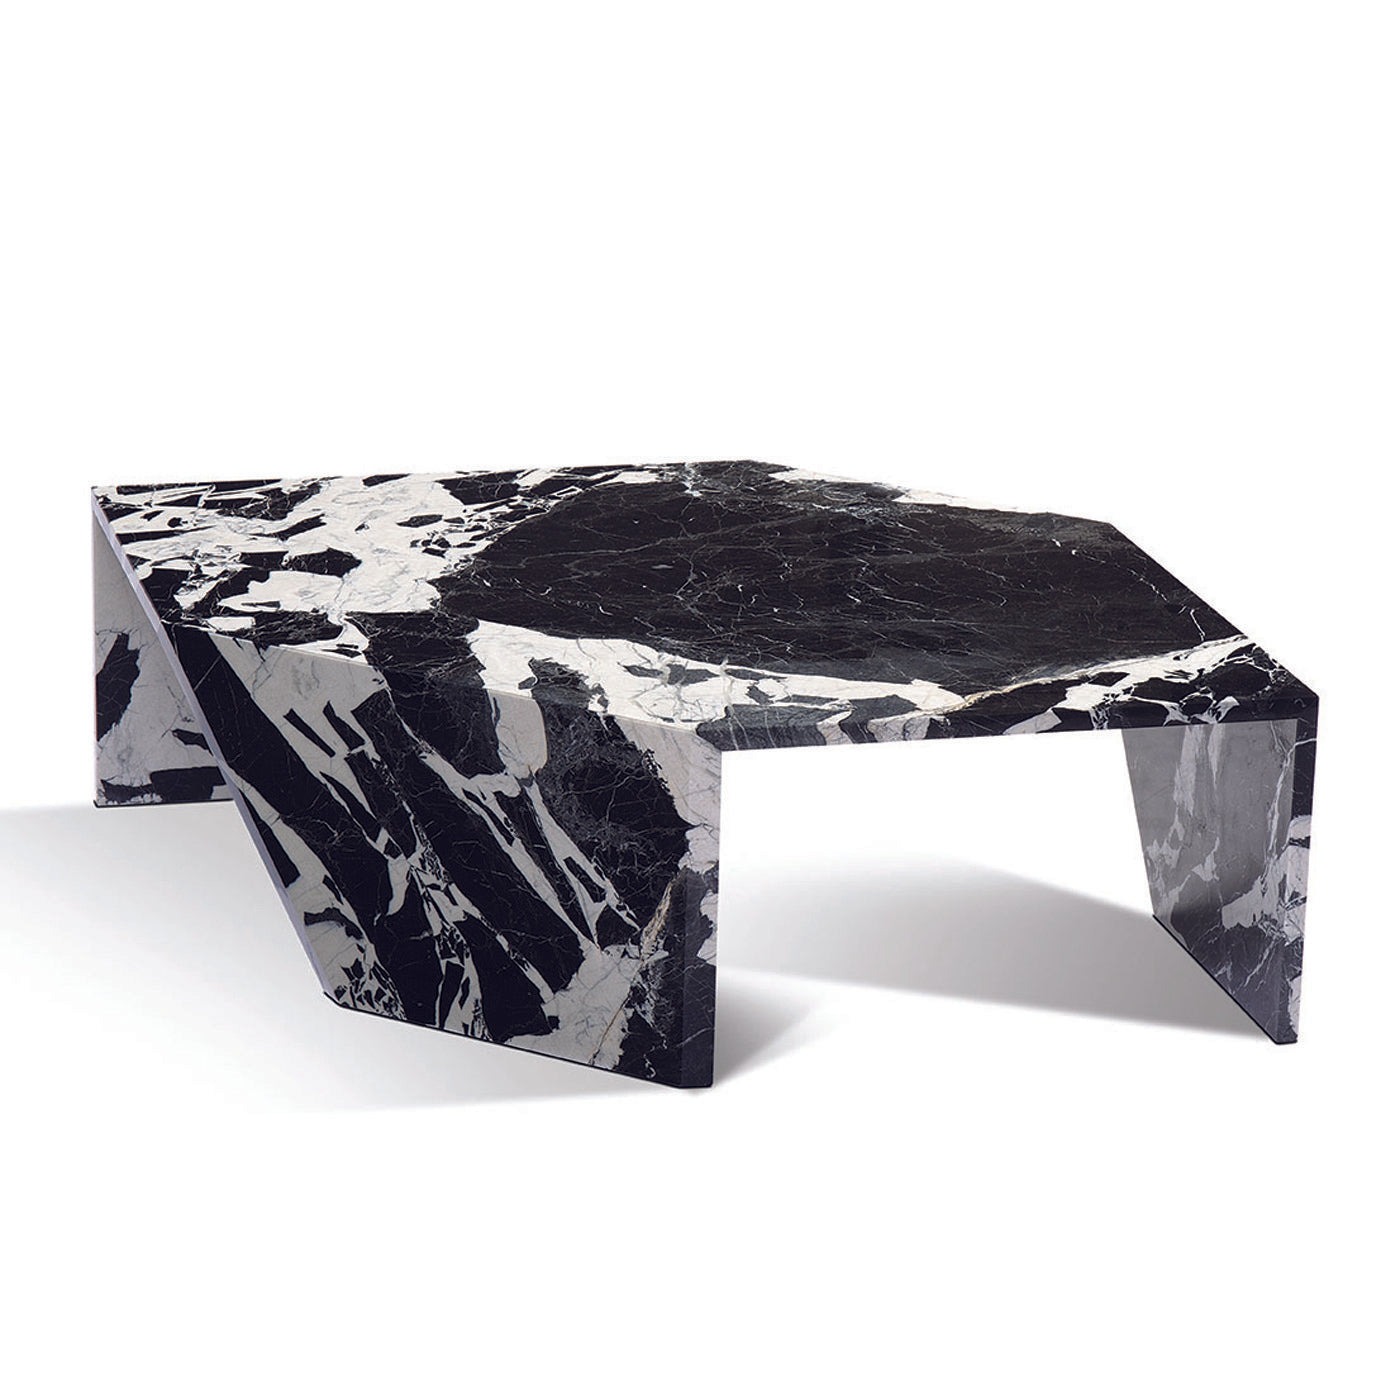 Black and White Origami Coffee Table by Patricia Urquiola - Alternative view 1